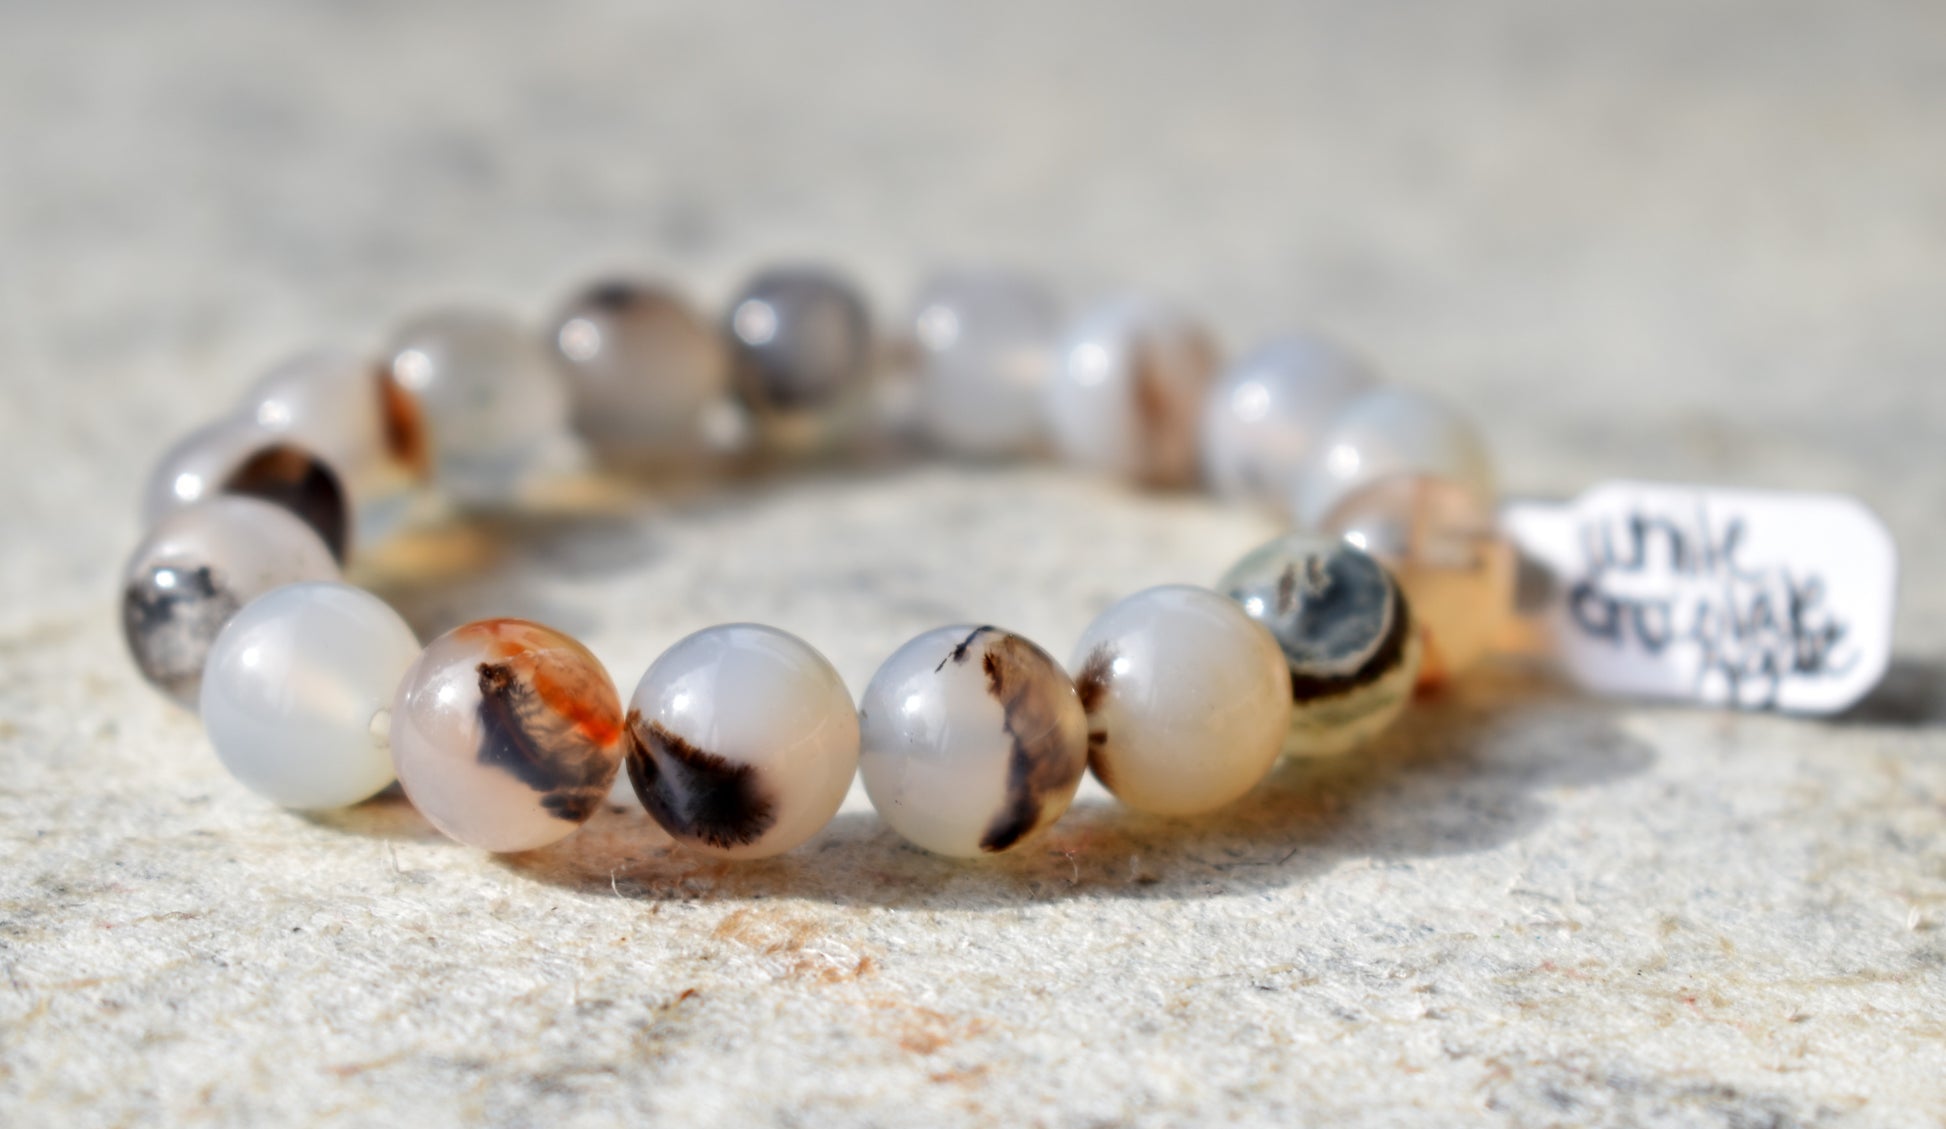 stones-of-transformation - White Chocolate Agate Bracelet - Stones of Transformation - 